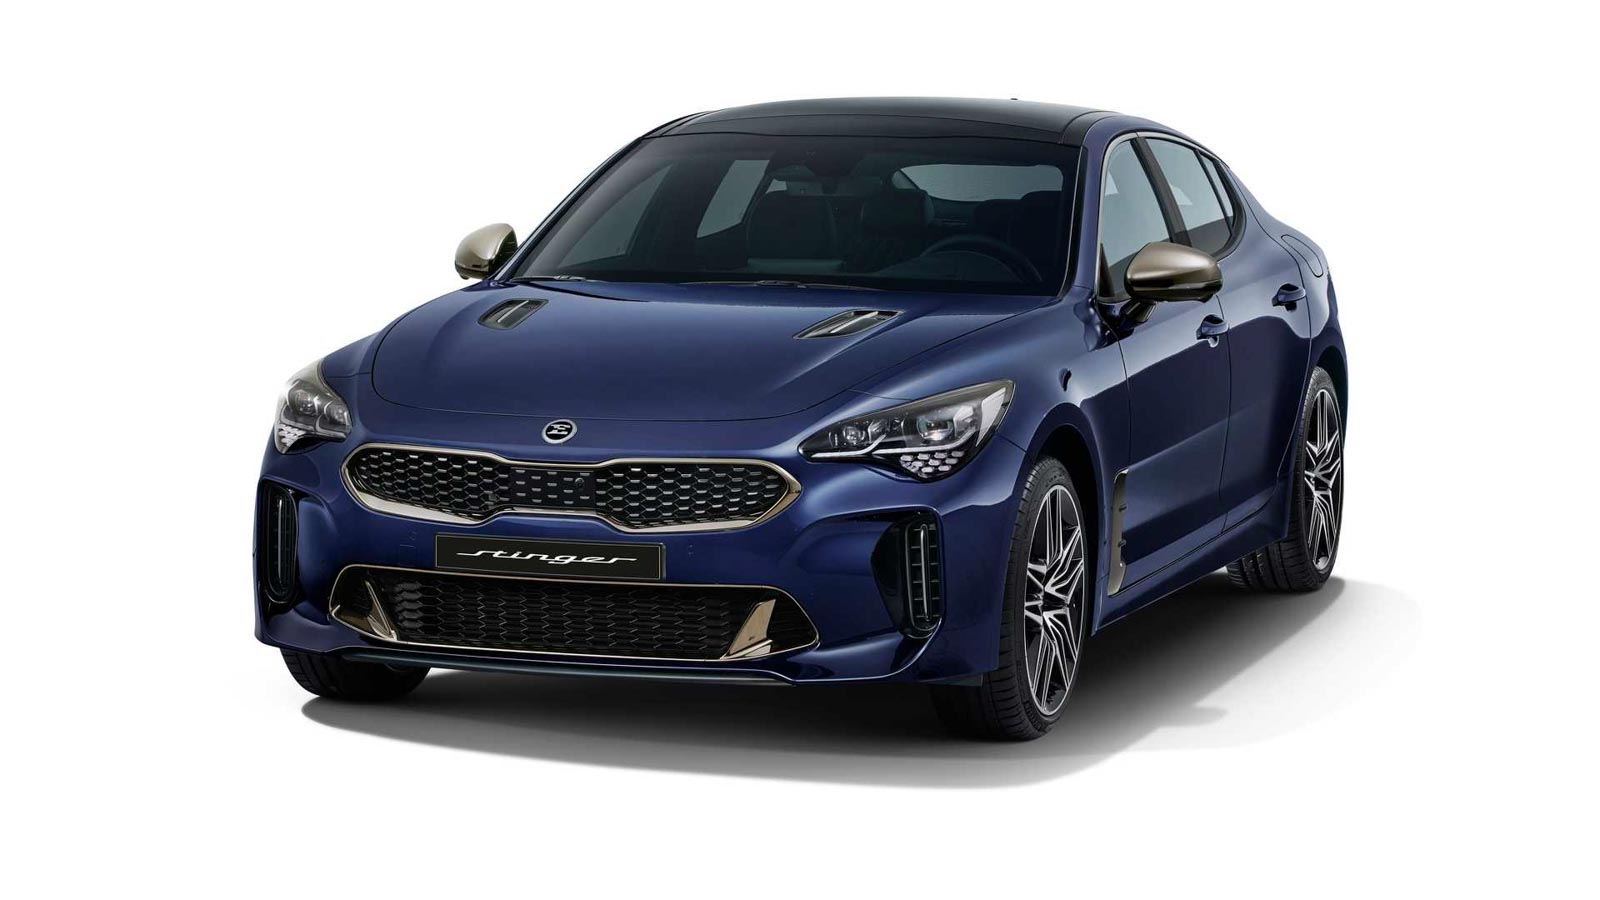 2021 Kia Stinger Facelift Gets Upgraded Exterior And Cabin